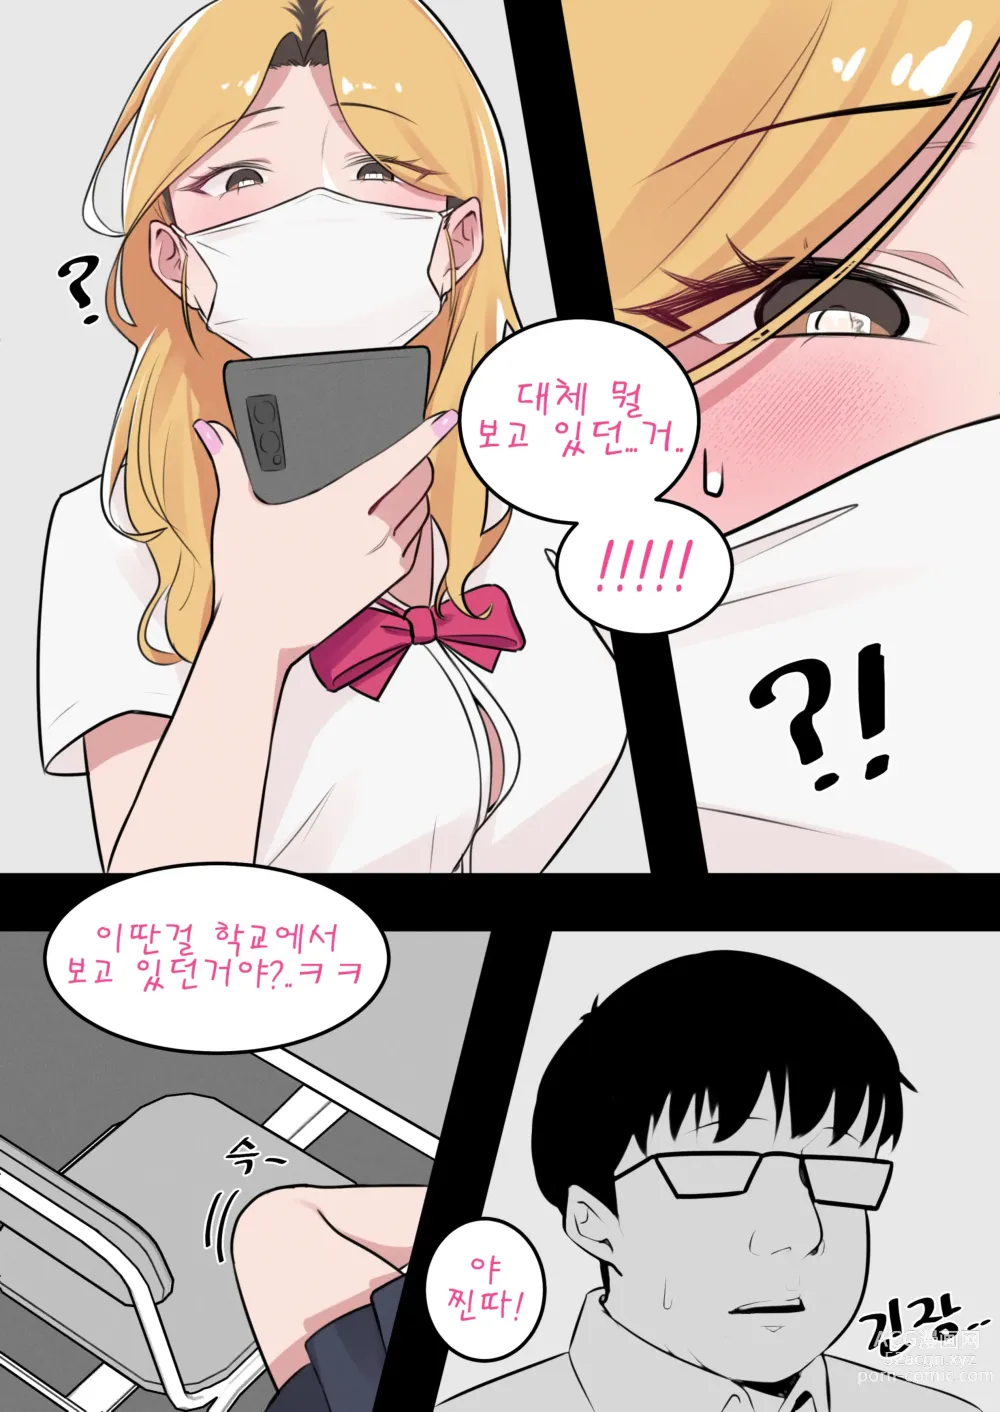 Page 2 of doujinshi After school with Il Jin-nyeo